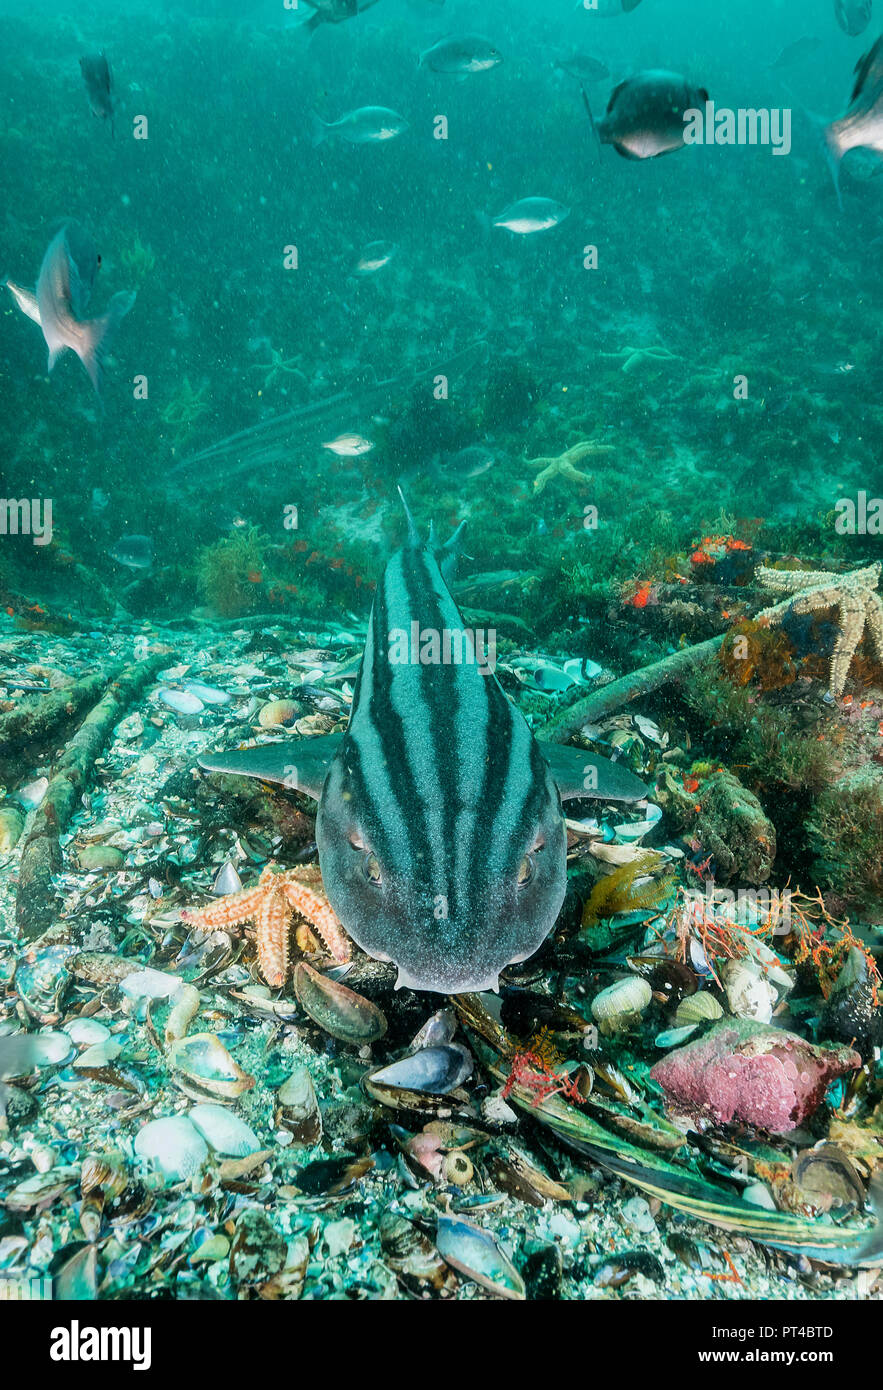 Striped pyjama cat shark swimming over the coral reef, False Bay, Cape Town. Stock Photo